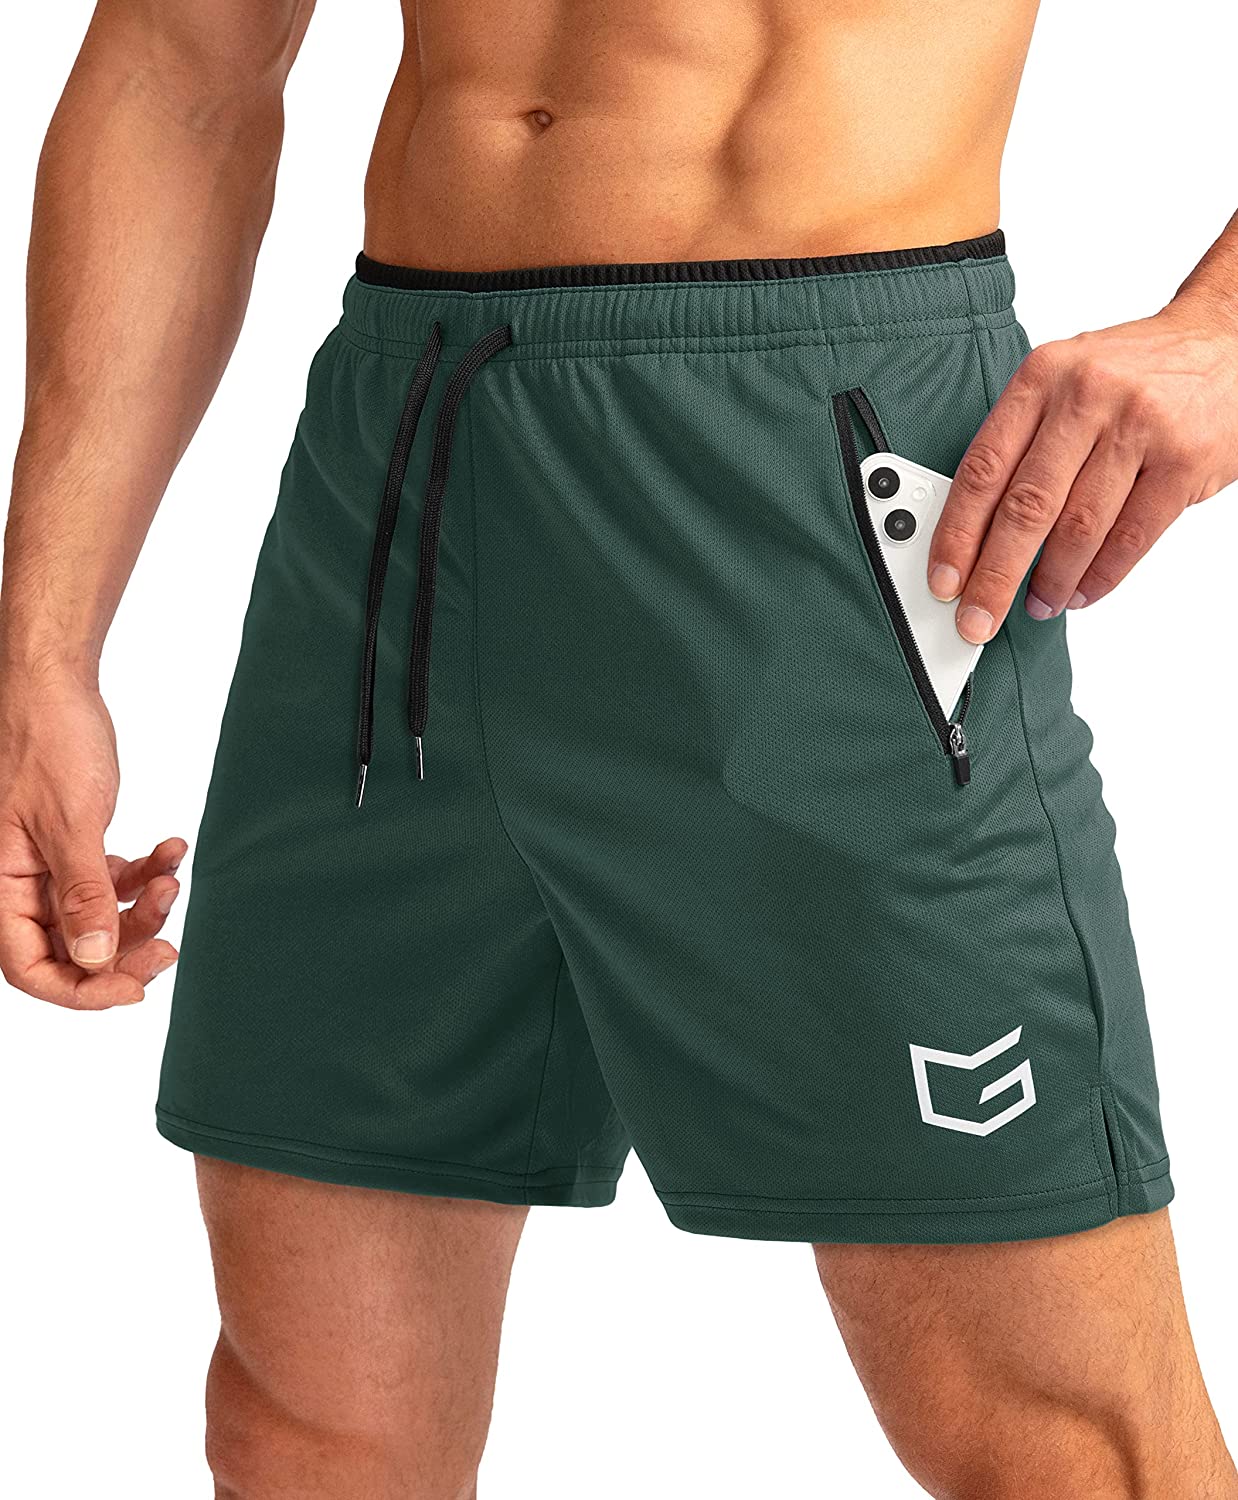 G Gradual Men's Running Shorts with Zipper Pockets Quick Dry Gym Athletic  Workou